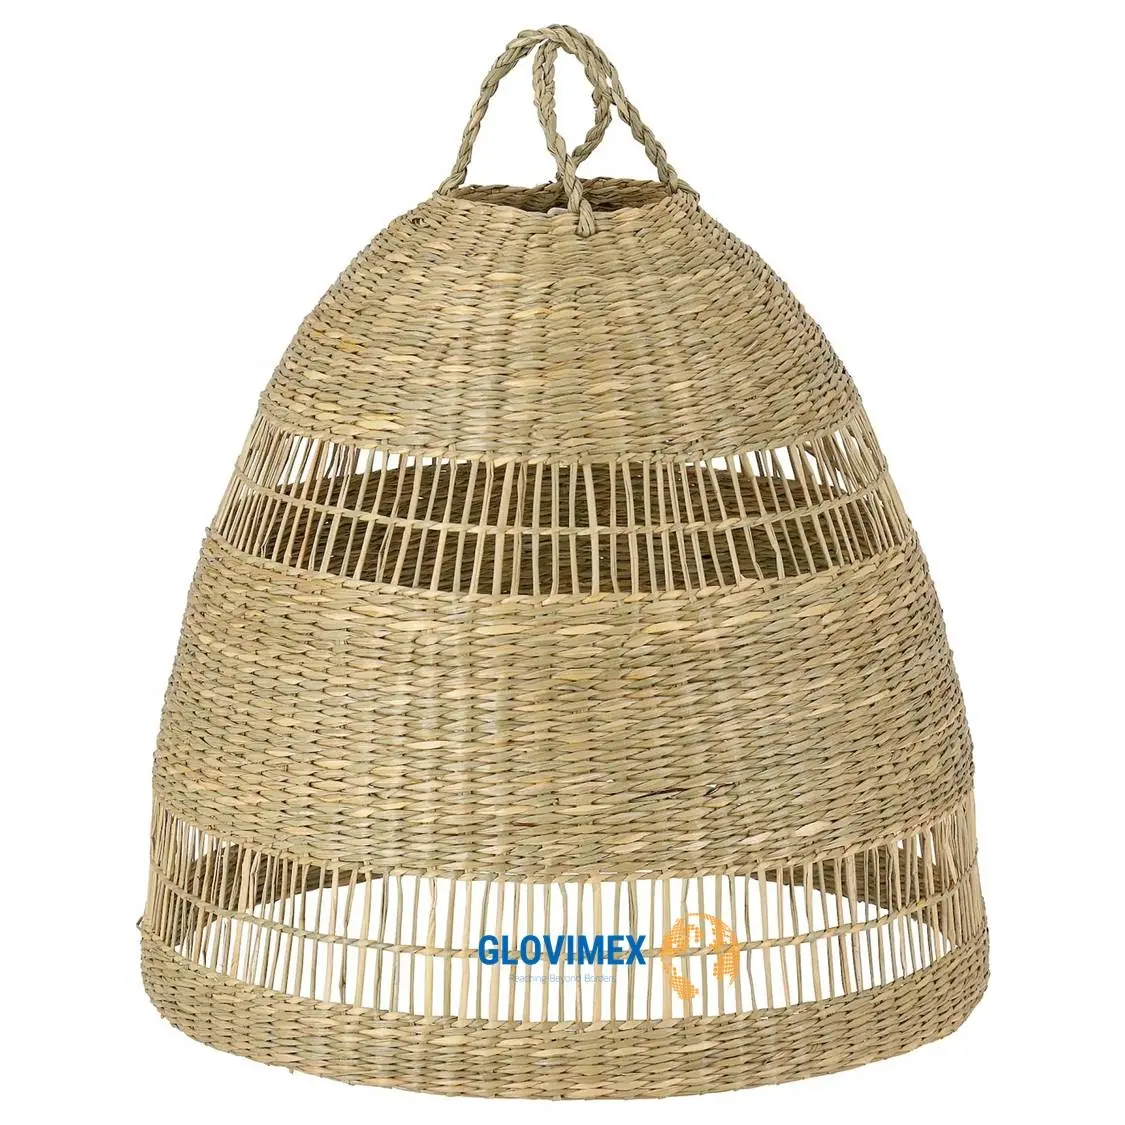 For Inferior Decor 100% Eco-Friendly Rattan Bamboo Seagrass Lampshade Vintage Lighting For Interior Decor From Vietnam